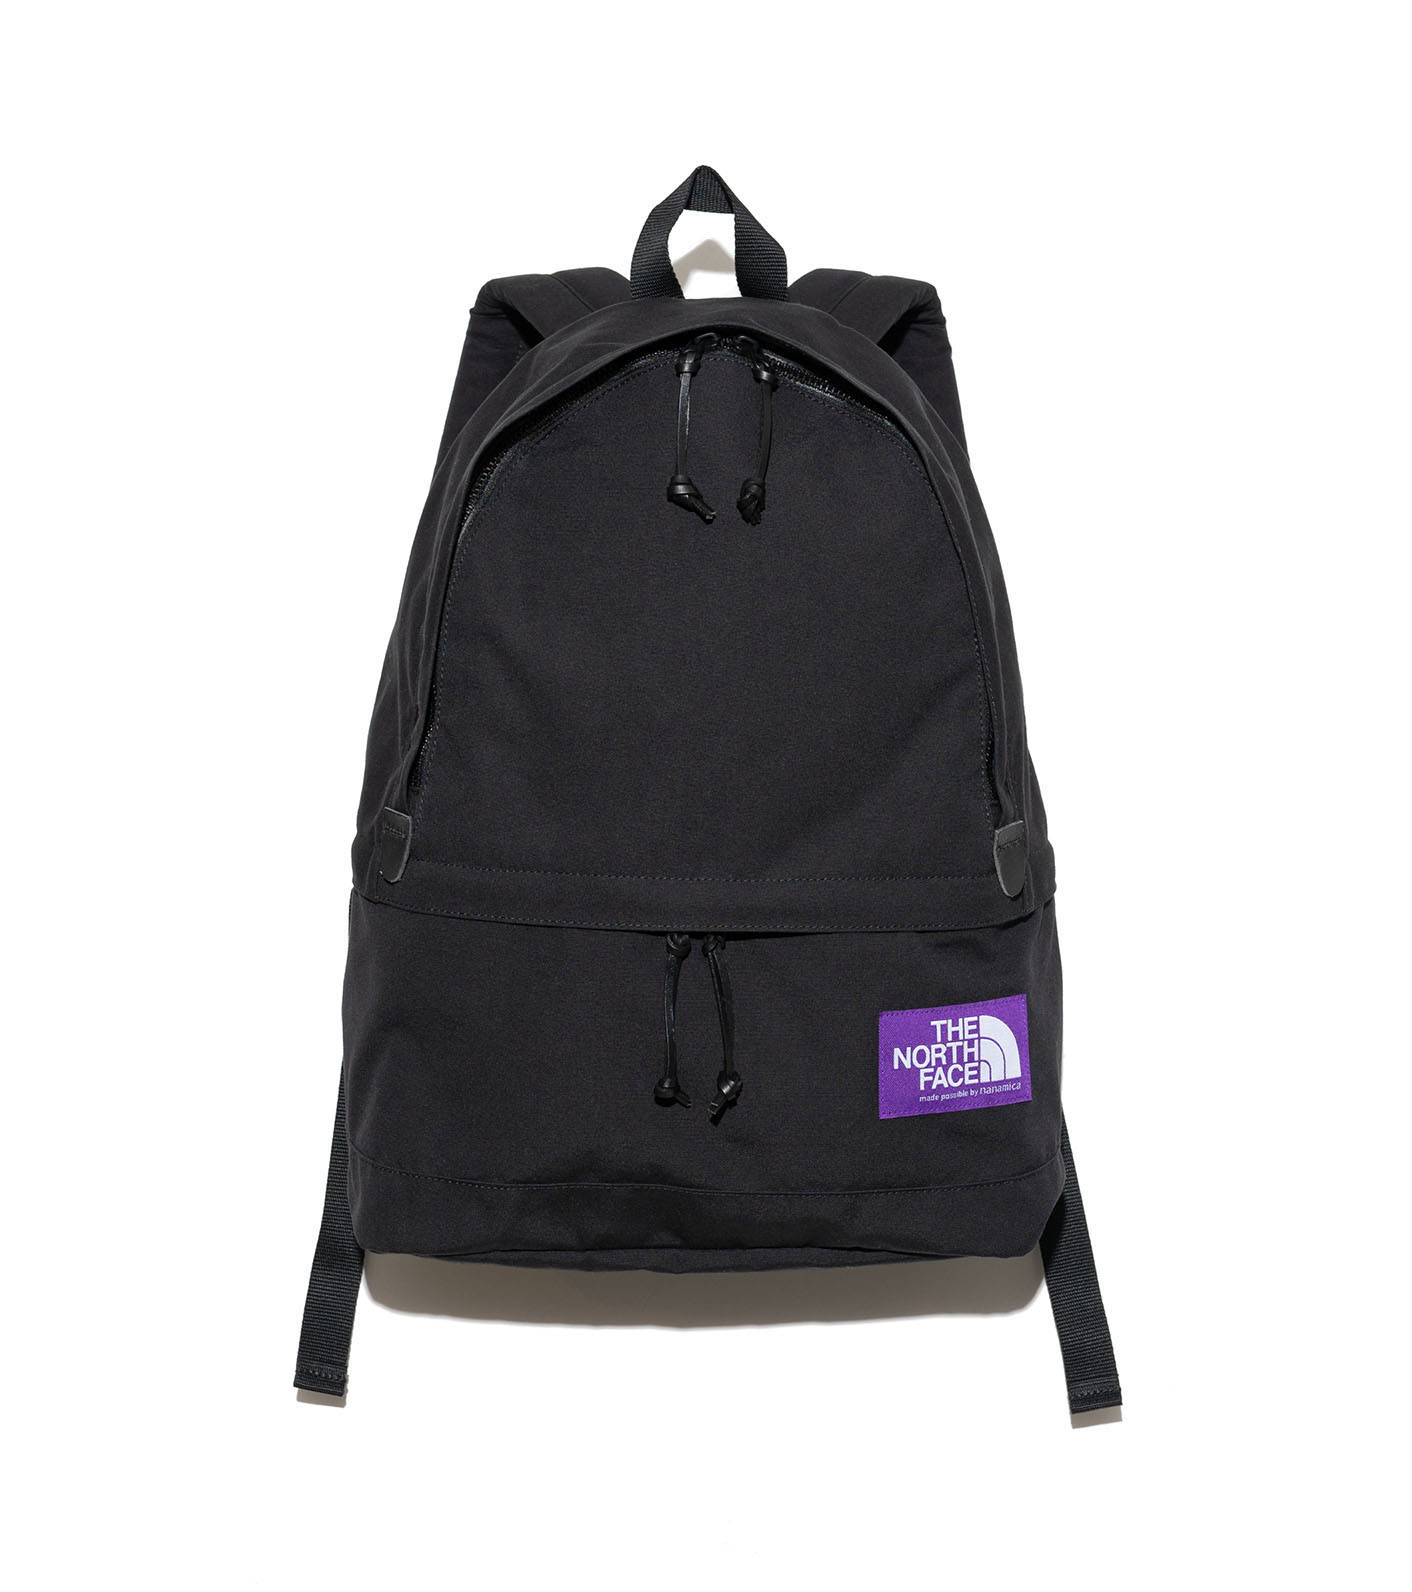 THE NORTH FACE PURPLE LABEL Day Pack 新品軽く畳んで梱包します